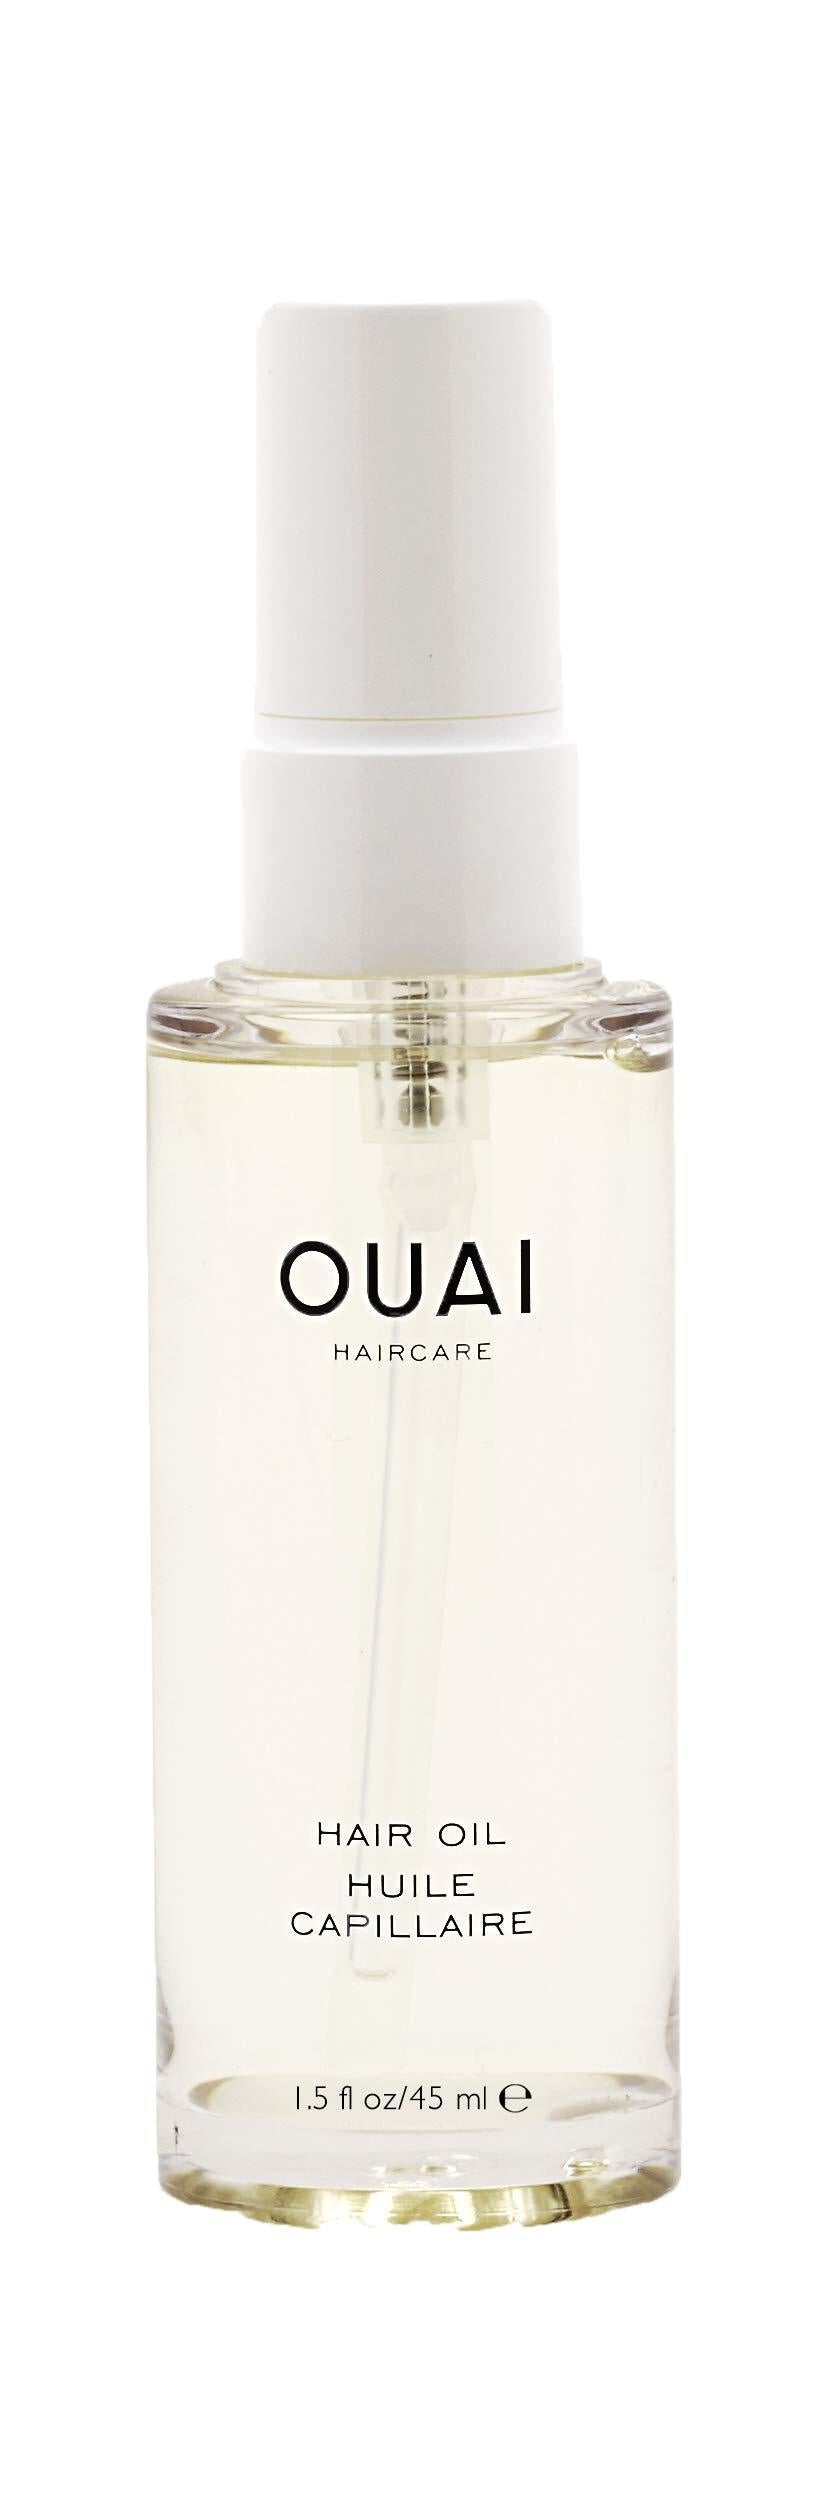 [Australia] - OUAI Hair Oil. Lightweight, Multitasking Oil Protects from UV/Heat Damage and Frizz, Adds Mega Shine and Smooths Split Ends. Safe for Colored Hair. Free from Parabens, Sulfates and Phthalates (1.5 oz) 